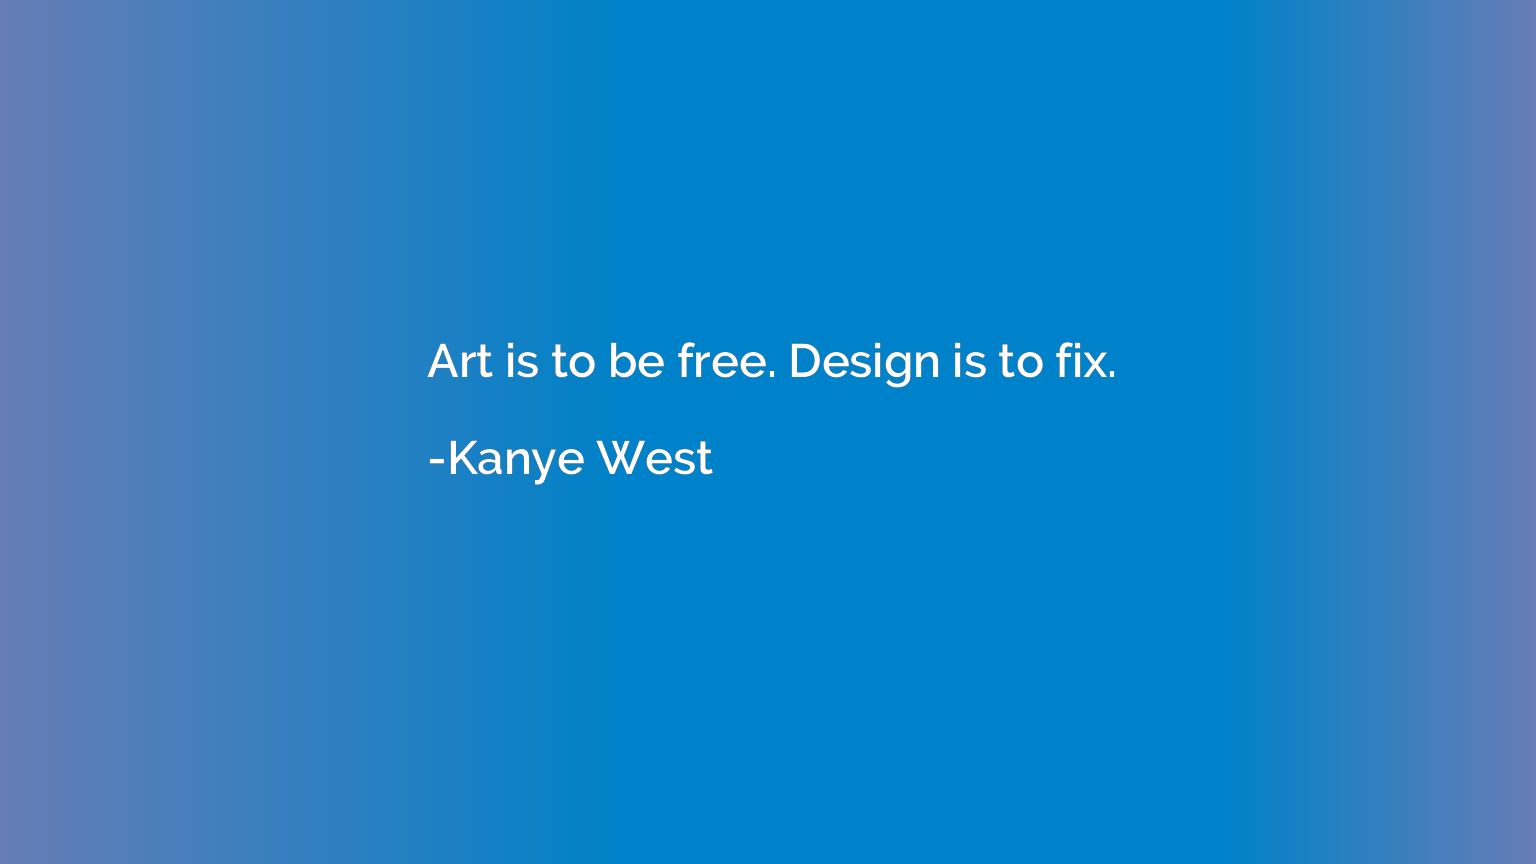 Art is to be free. Design is to fix.